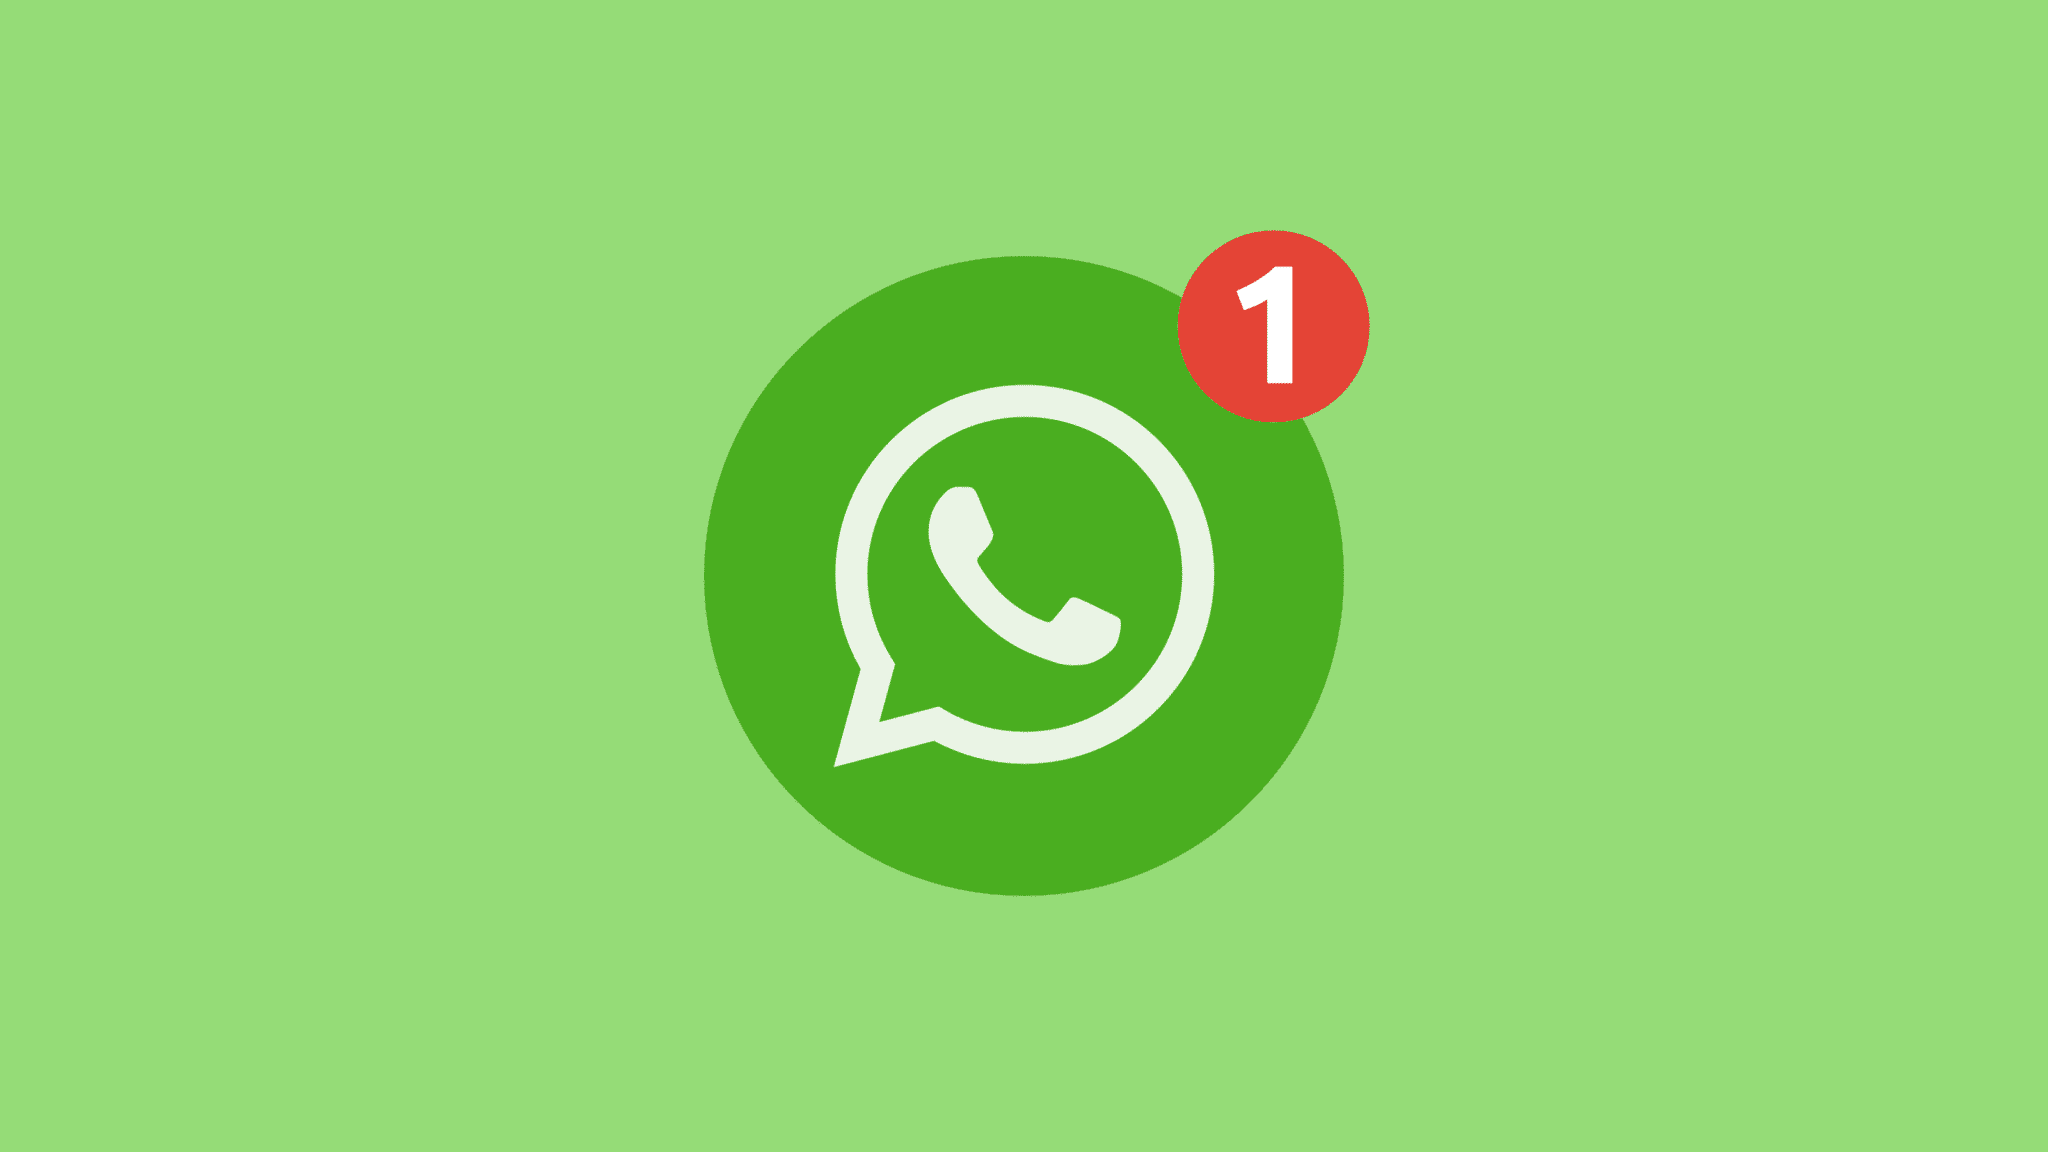 new message alert on the WhatsApp logo with light green background